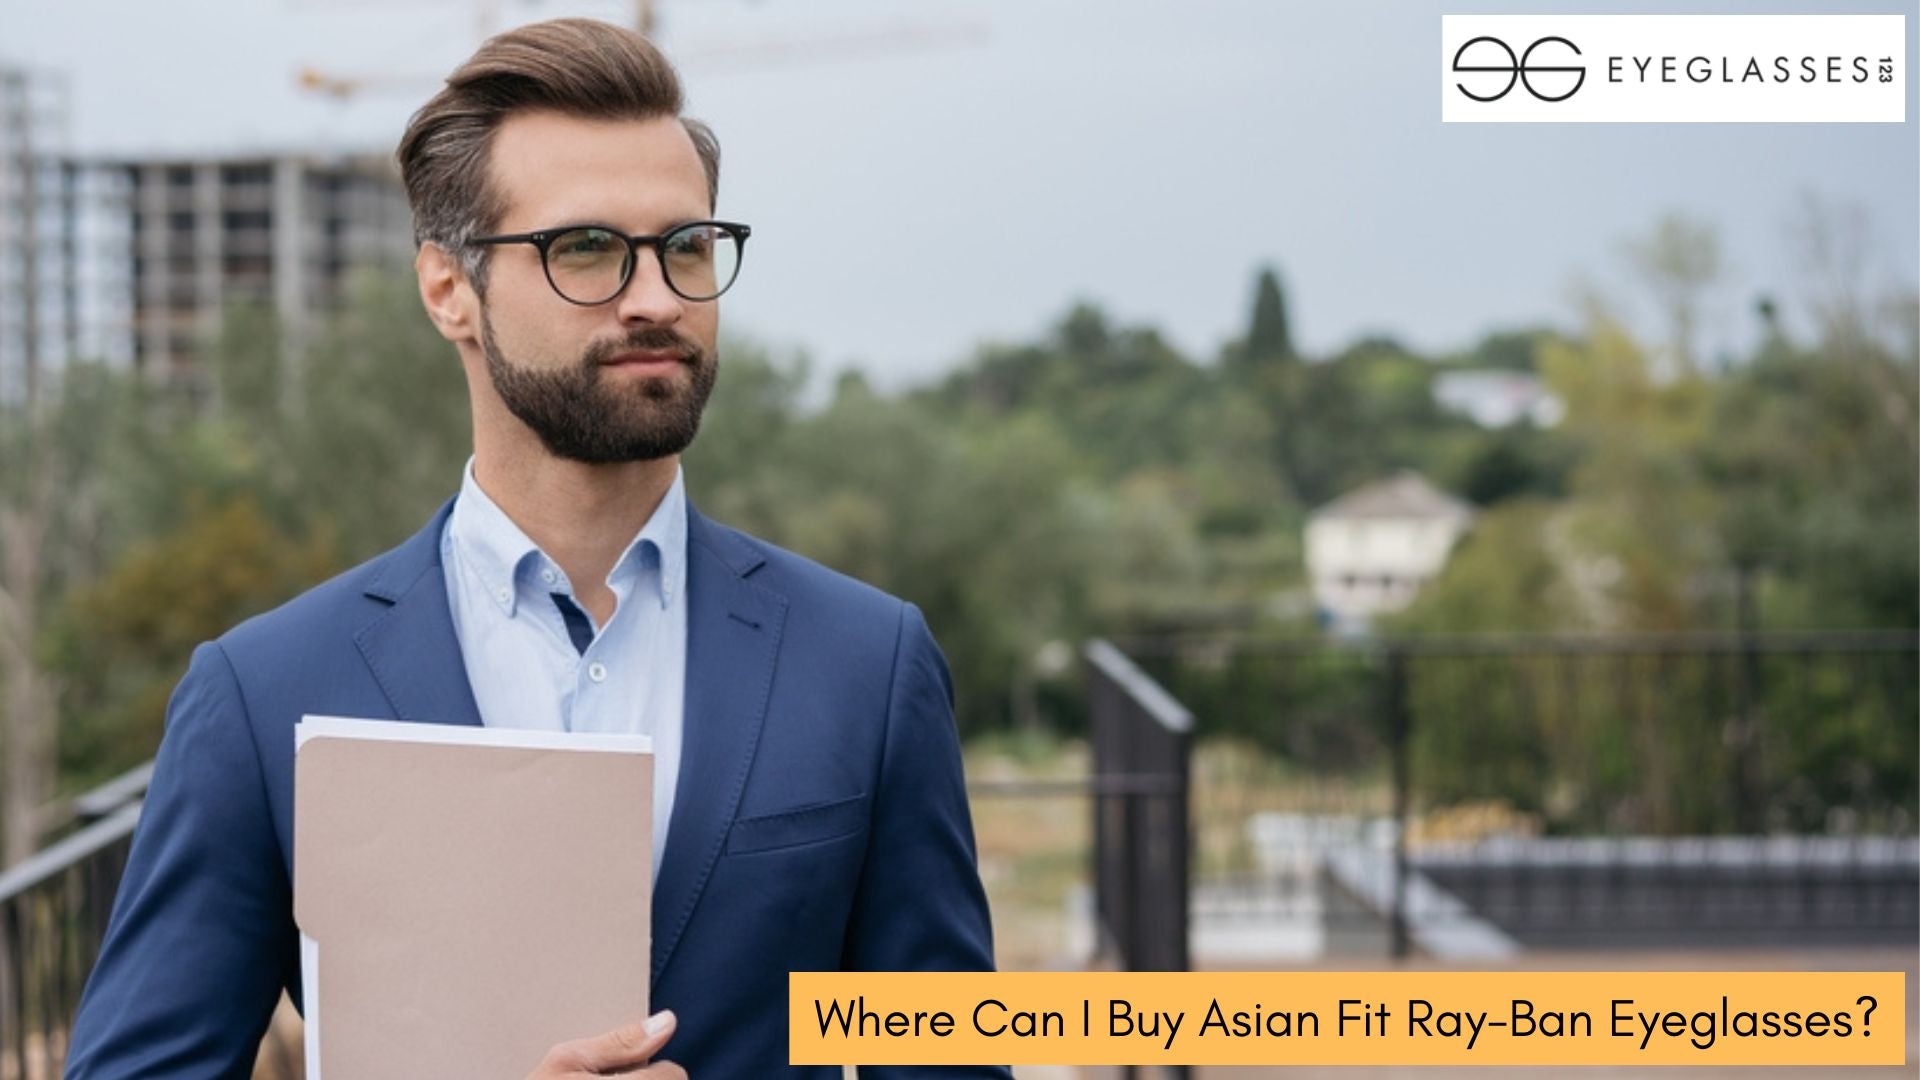 Where Can I Buy Asian Fit Ray-Ban Eyeglasses?